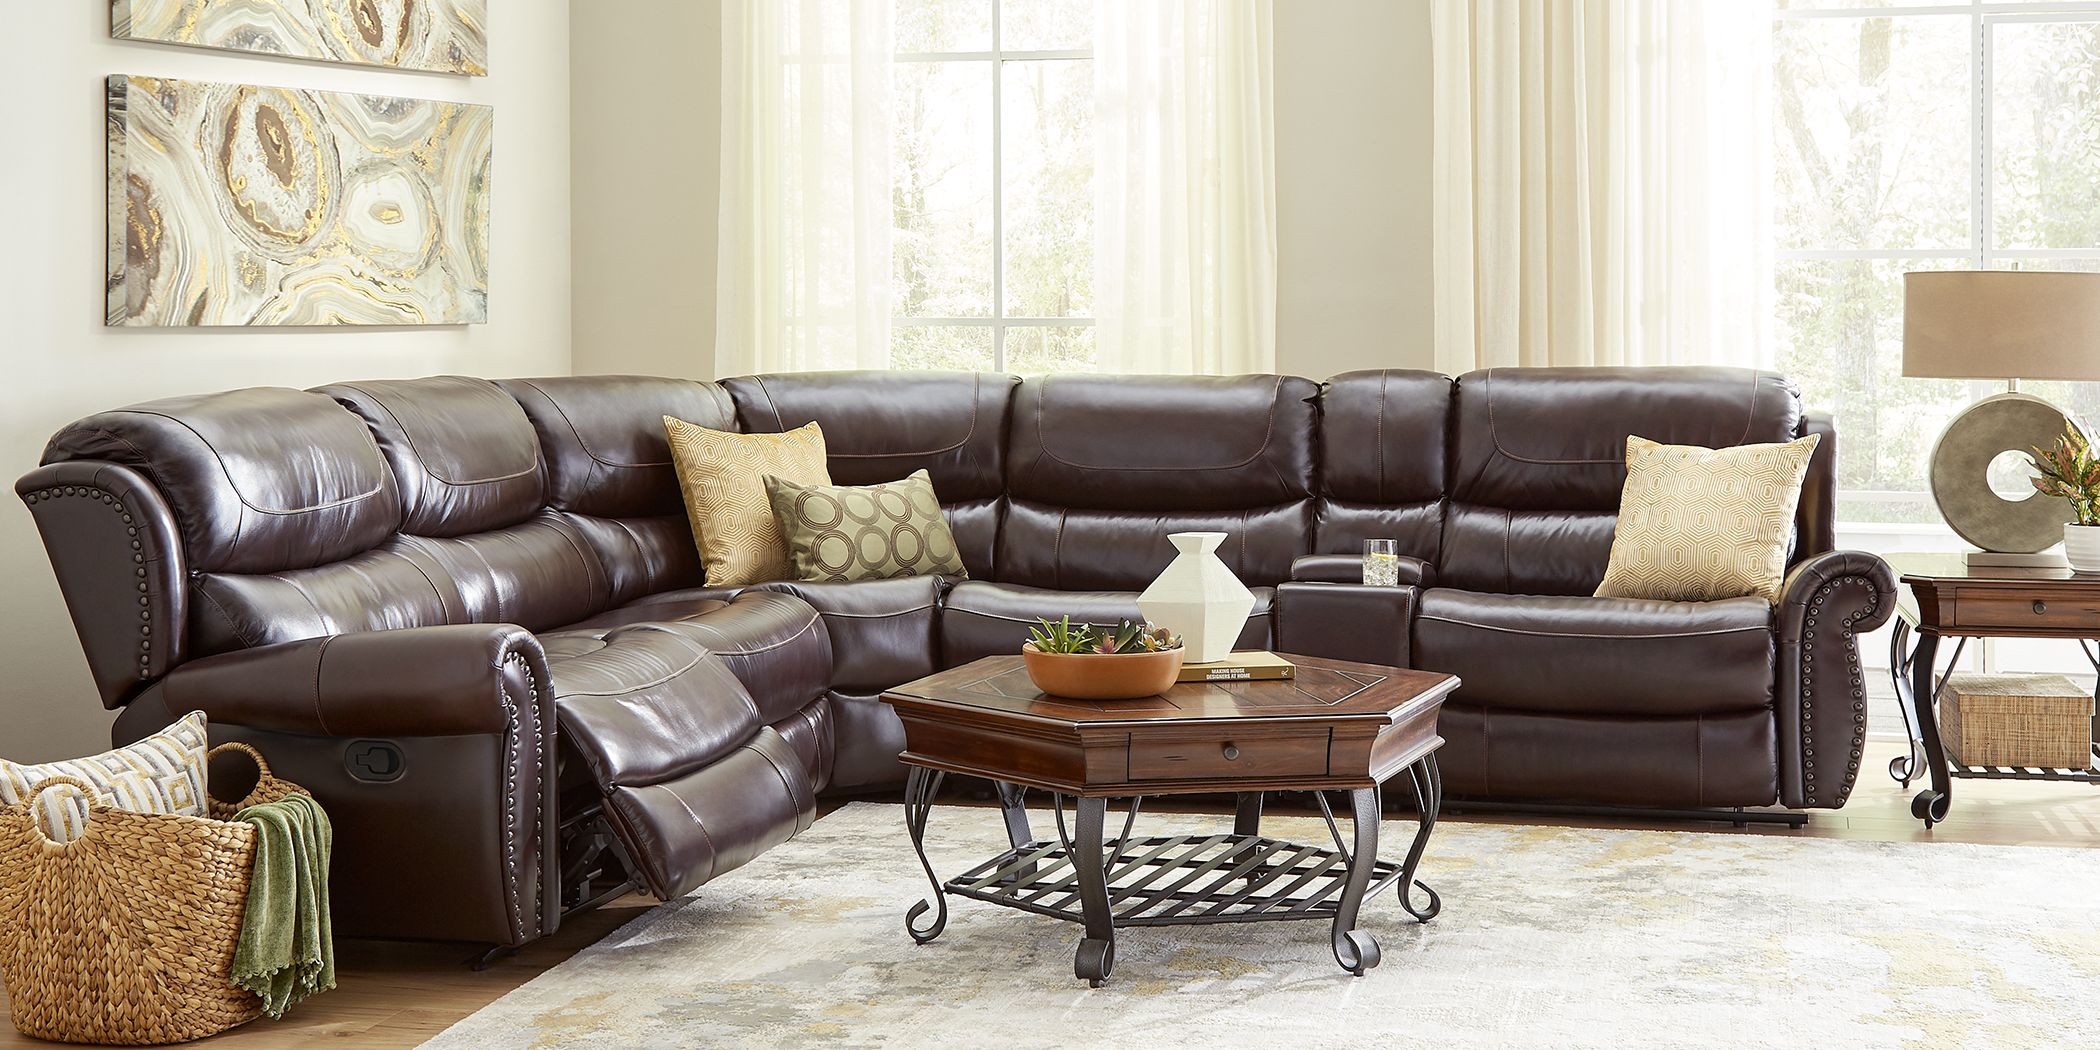 brown leather sectional living room